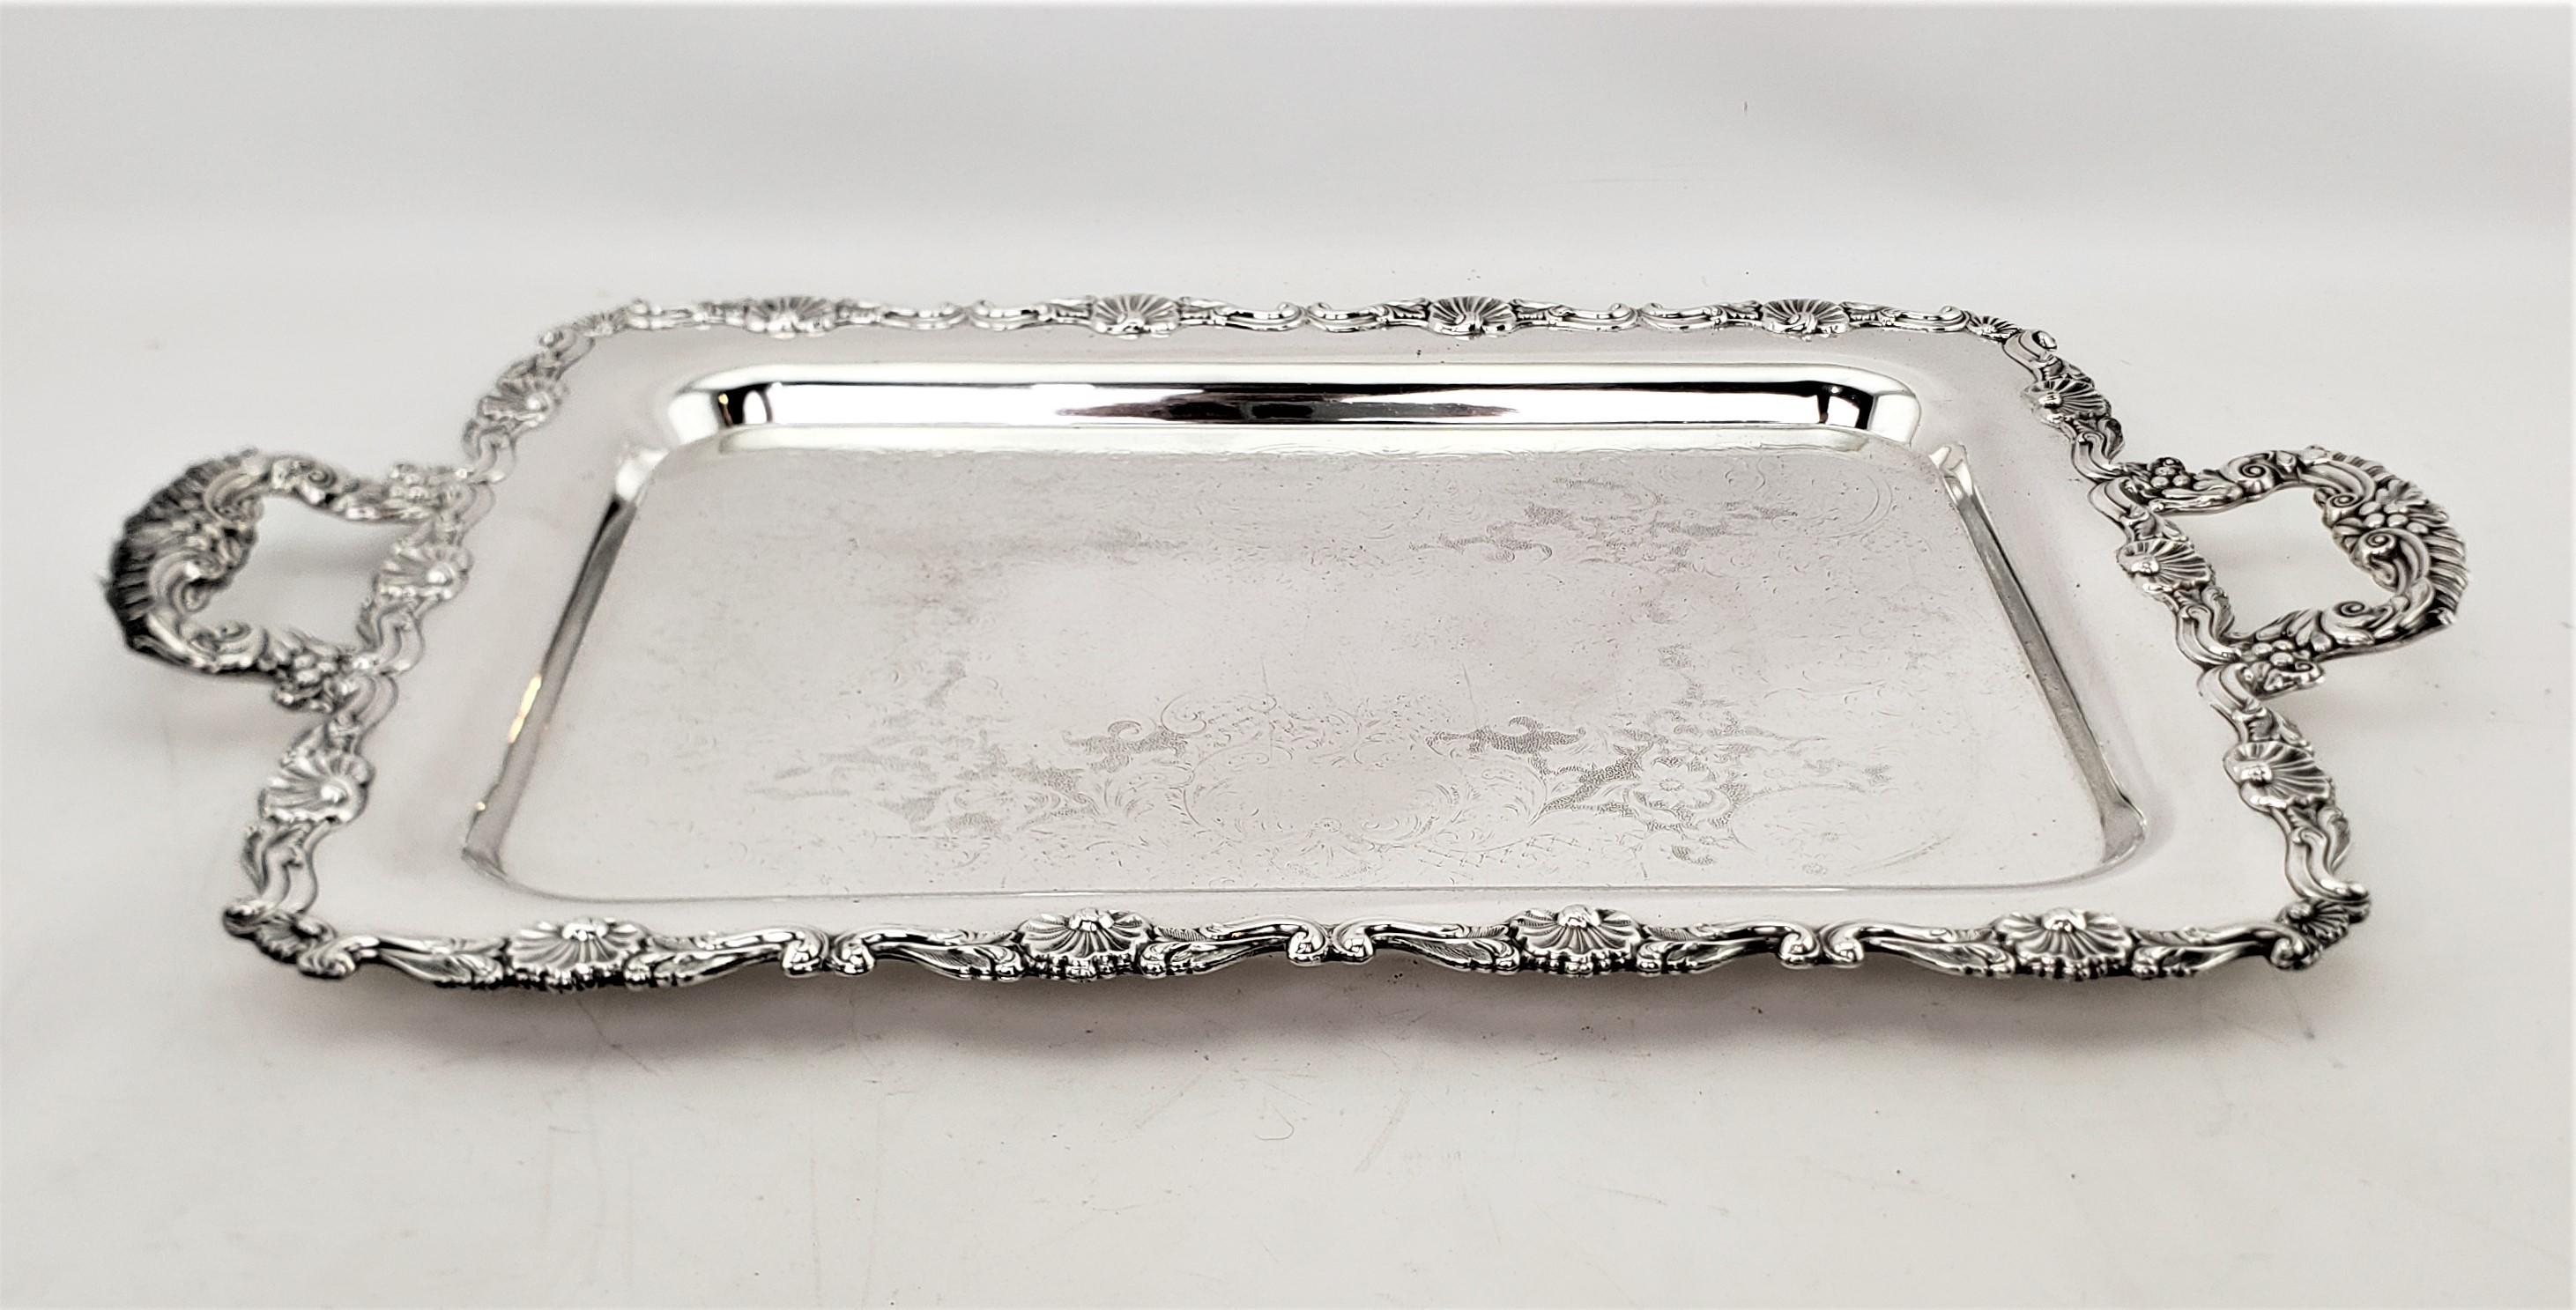 This antique rectangular silver plated serving tray is unsigned, but presumed to have originated from England and date to approximately 1920 and done in a Victorian style. The tray is done with a stylized floral border which is accented by the